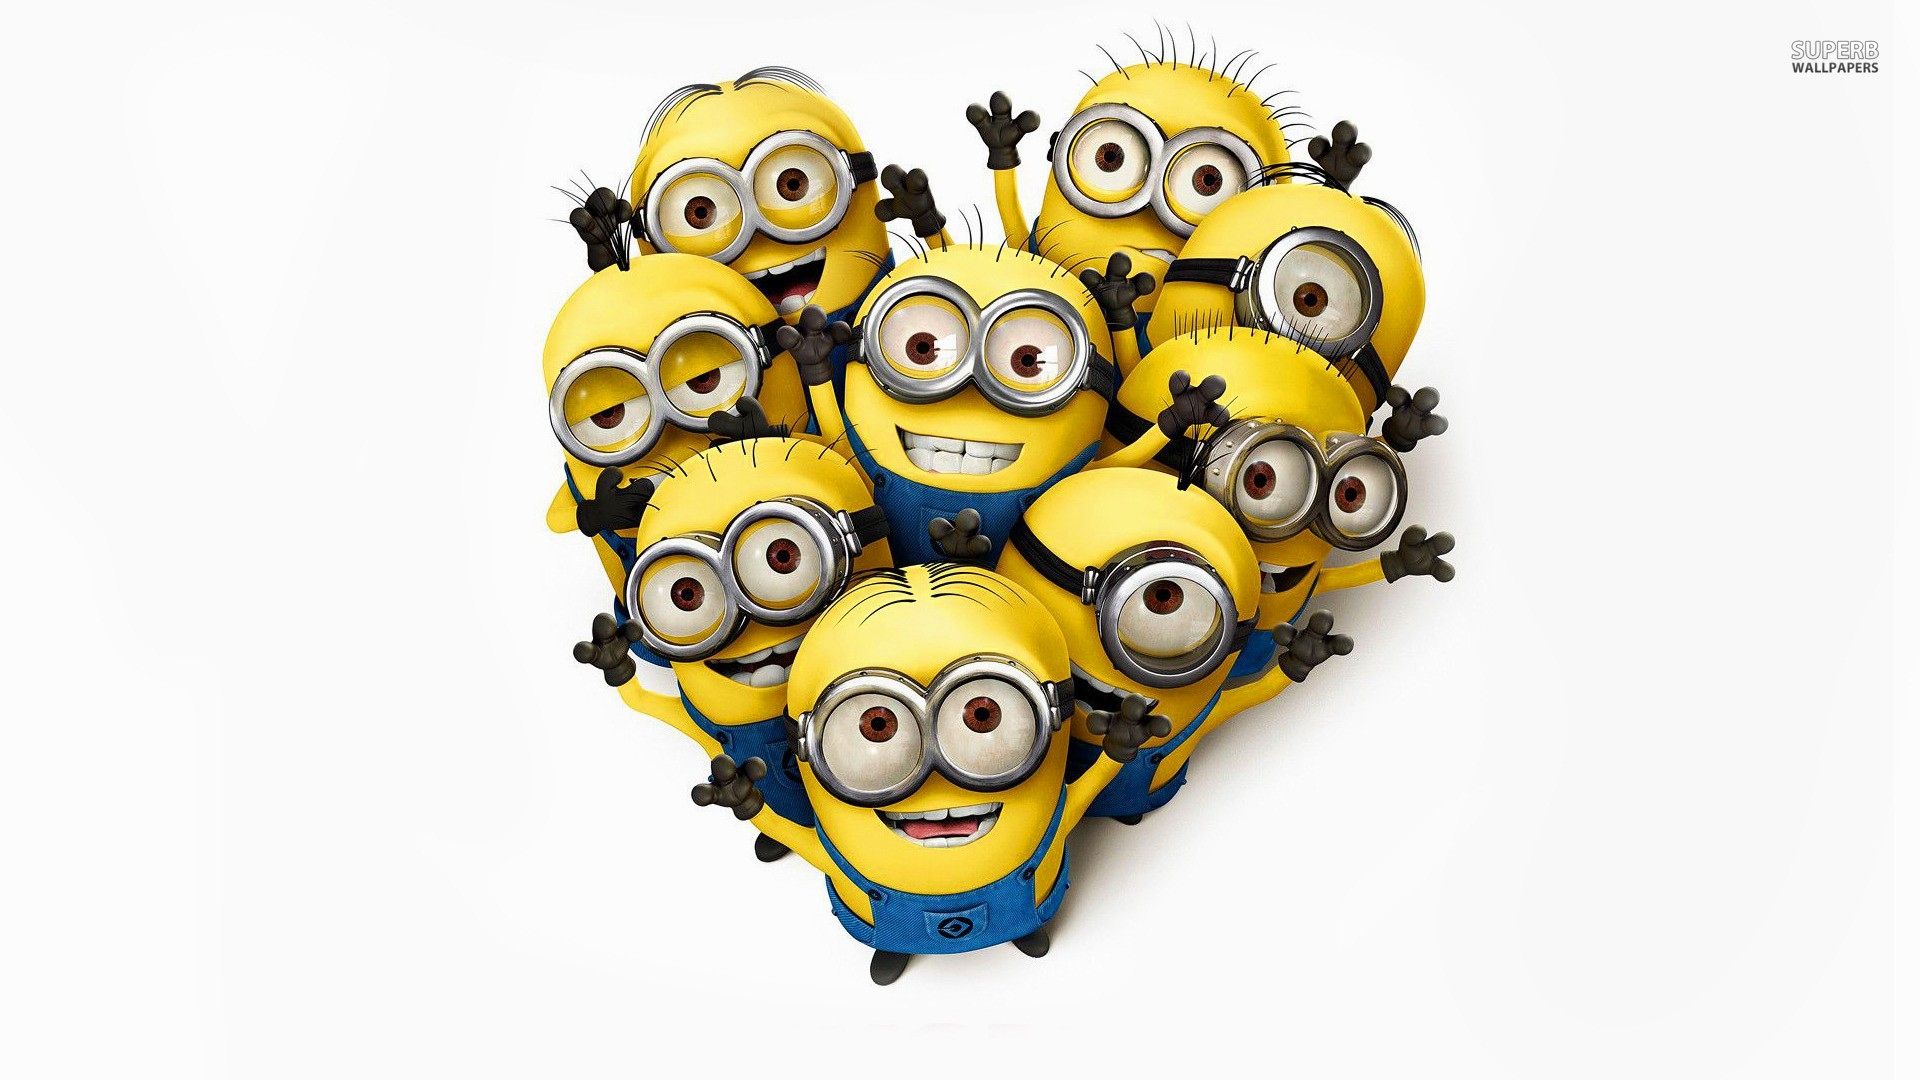 Wallpaper Minion Fresh Minions Background Quotes and Image This Week of The Hudson